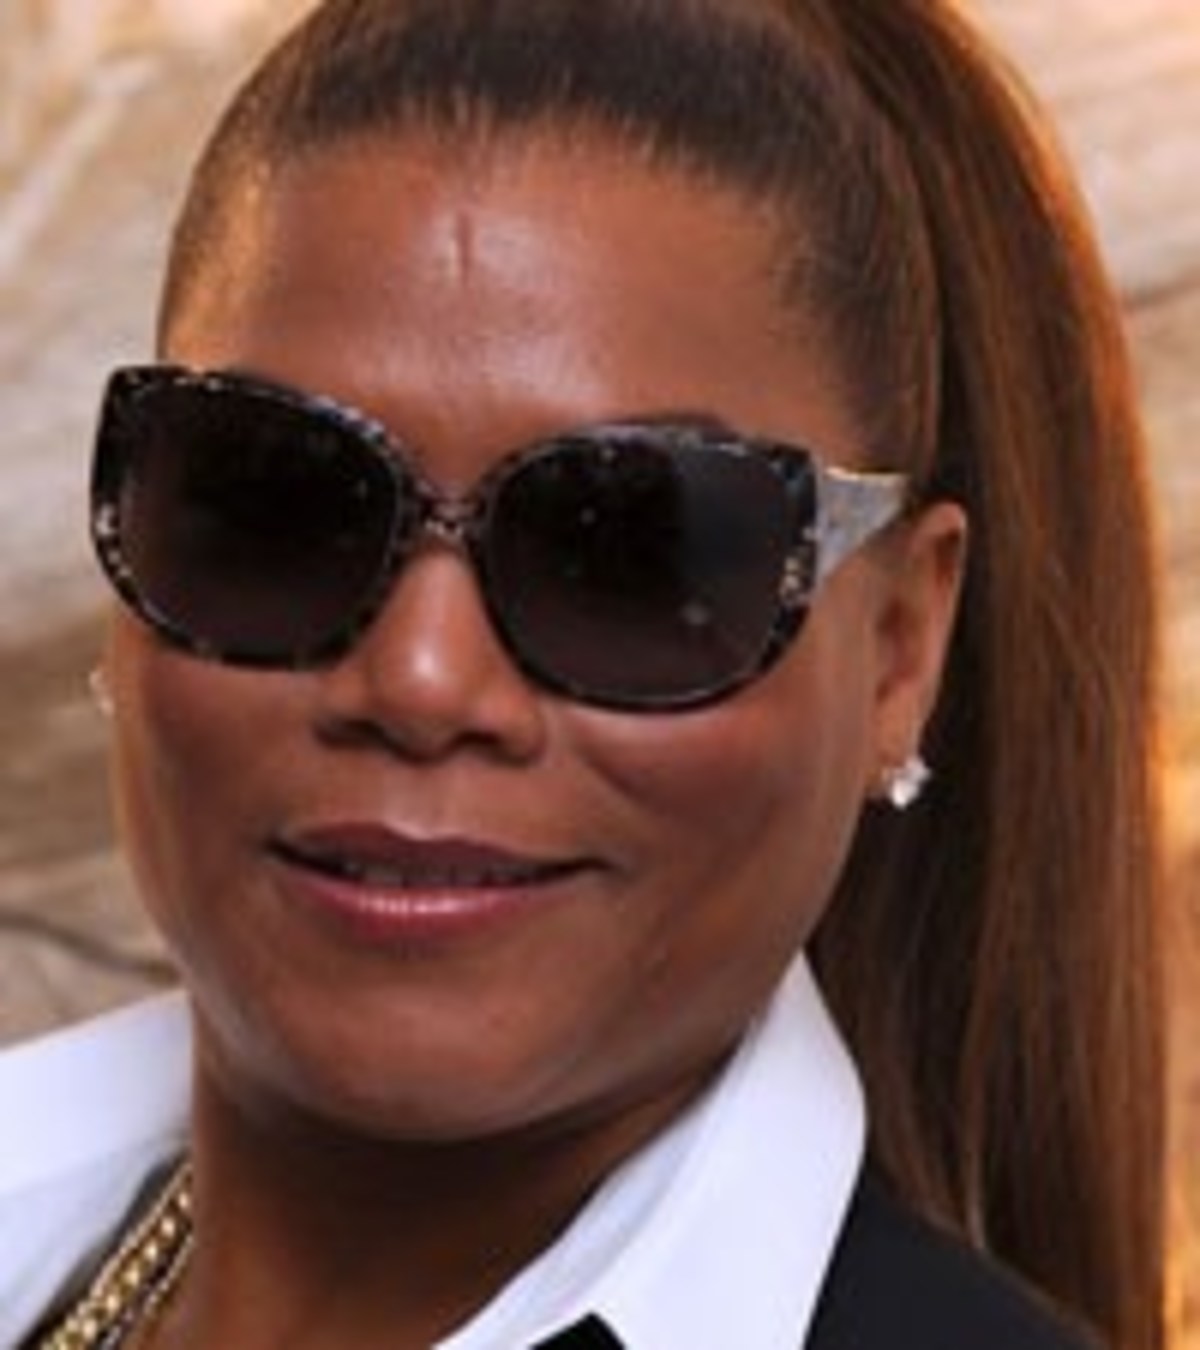 Queen Latifah Admits She Likes Confident Women With ‘Class’